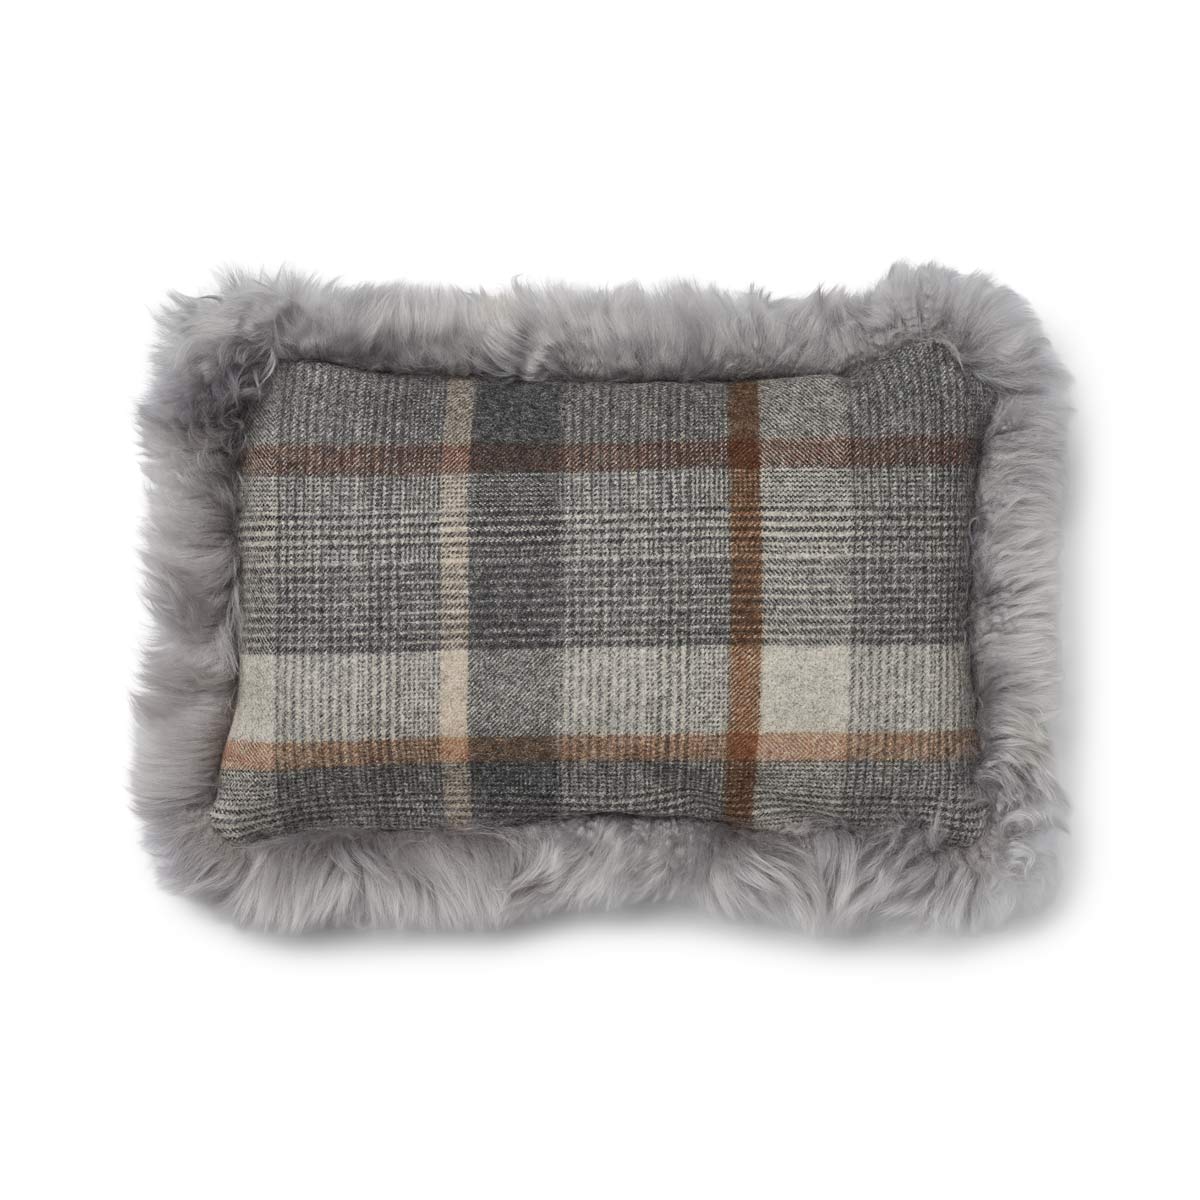 Checked Collection, Doublesided Cushion 100 % wool and LW NZ Sheepskin Trimming. Size: 34x52 cm.